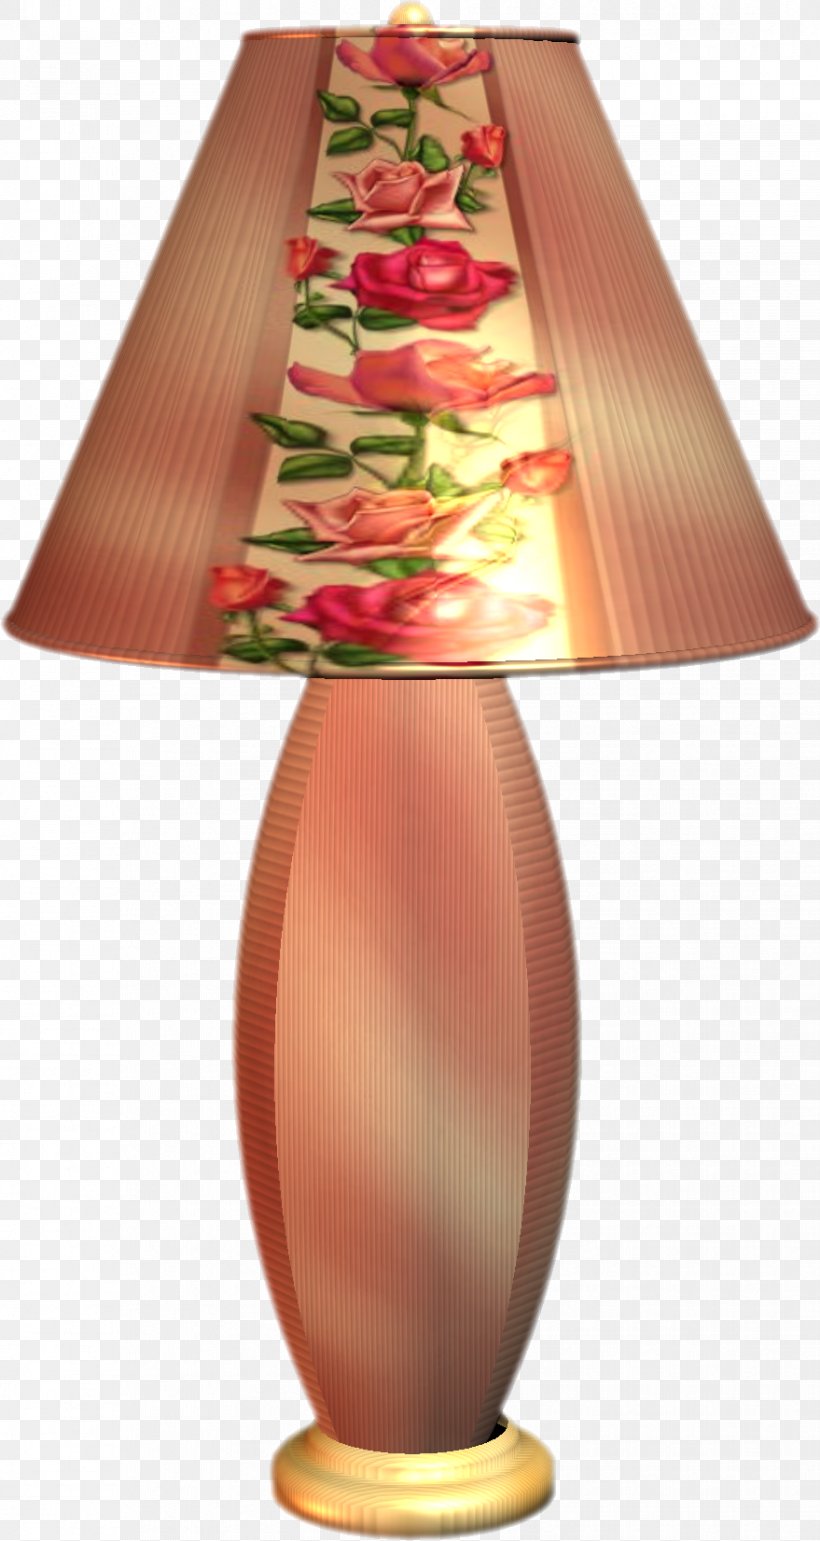 Light Fixture Lamp Shades Lighting, PNG, 879x1652px, Light Fixture, Lamp, Lamp Shades, Lampshade, Light Download Free